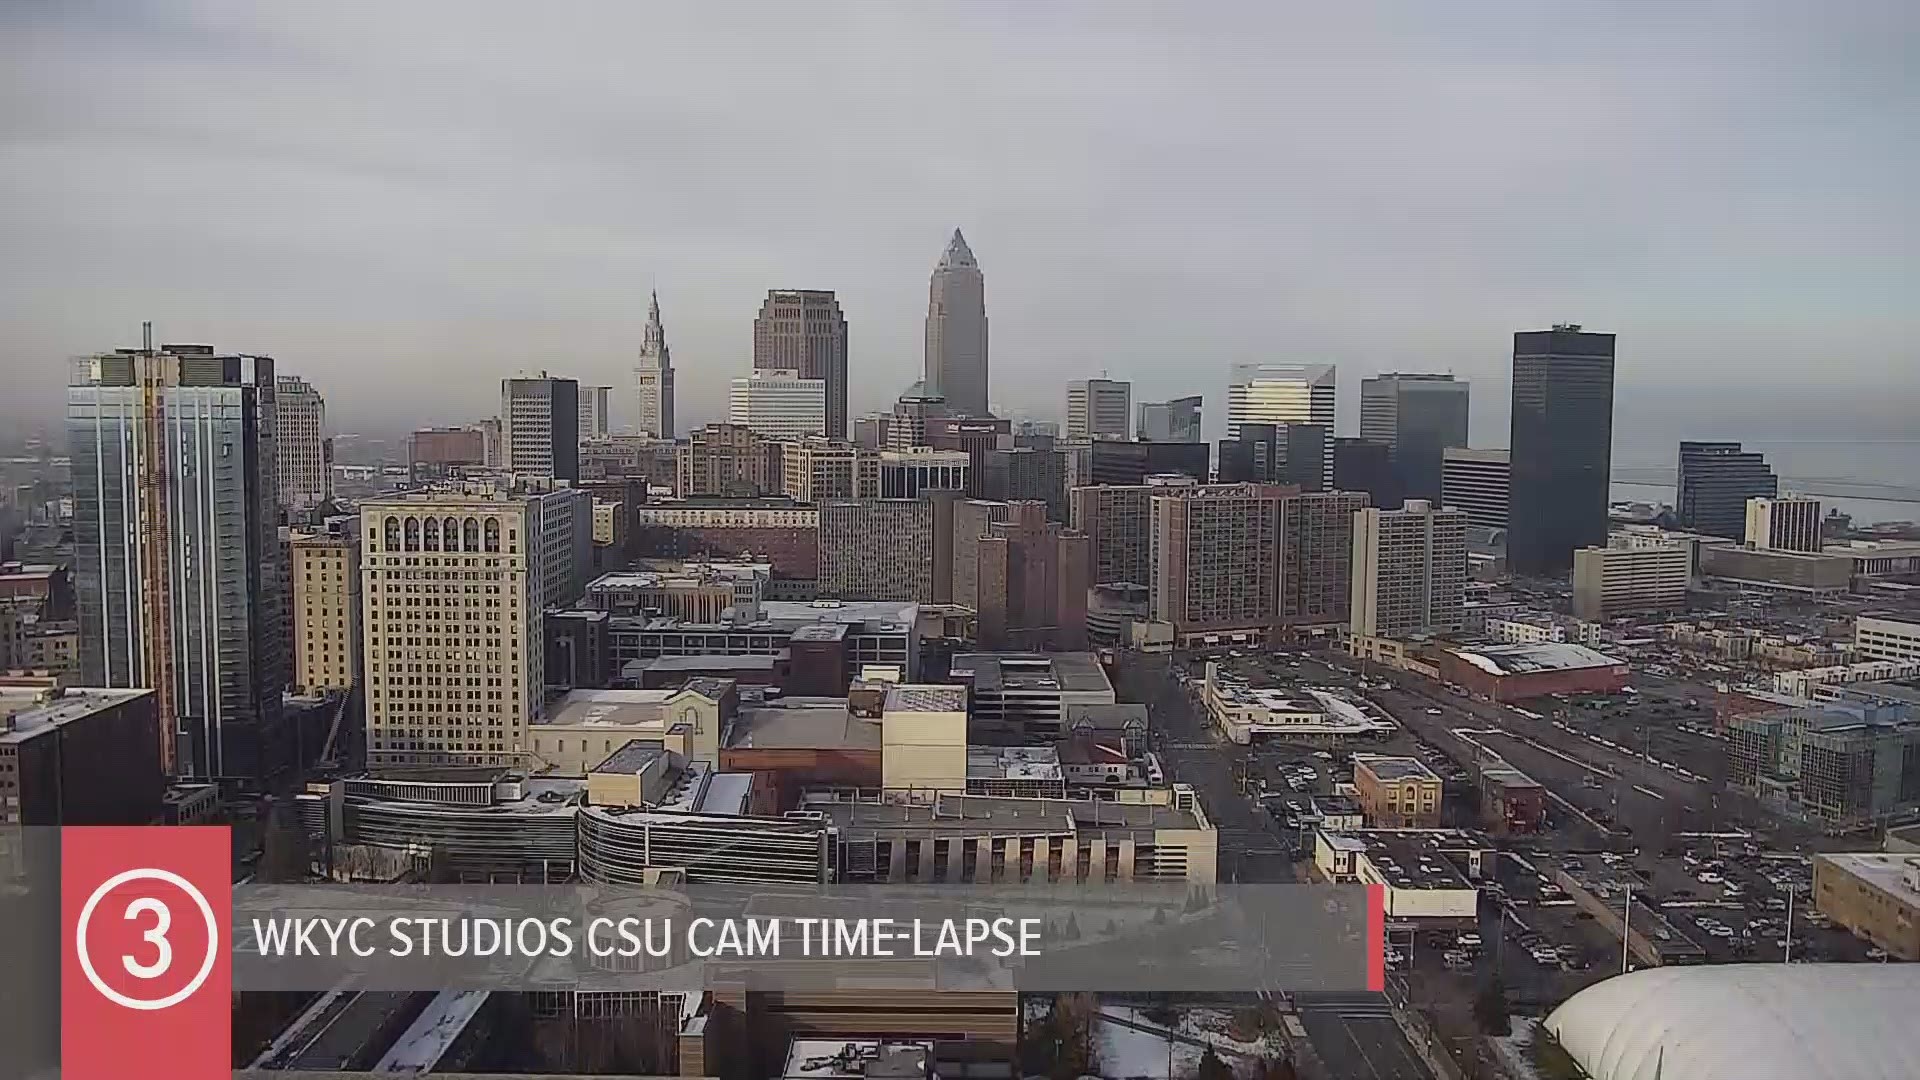 Monday was a pretty nice day across northeast Ohio to begin a new work week. Clouds were on the increase by the afternoon though. Courtesy: WKYC Studios CSU Cam